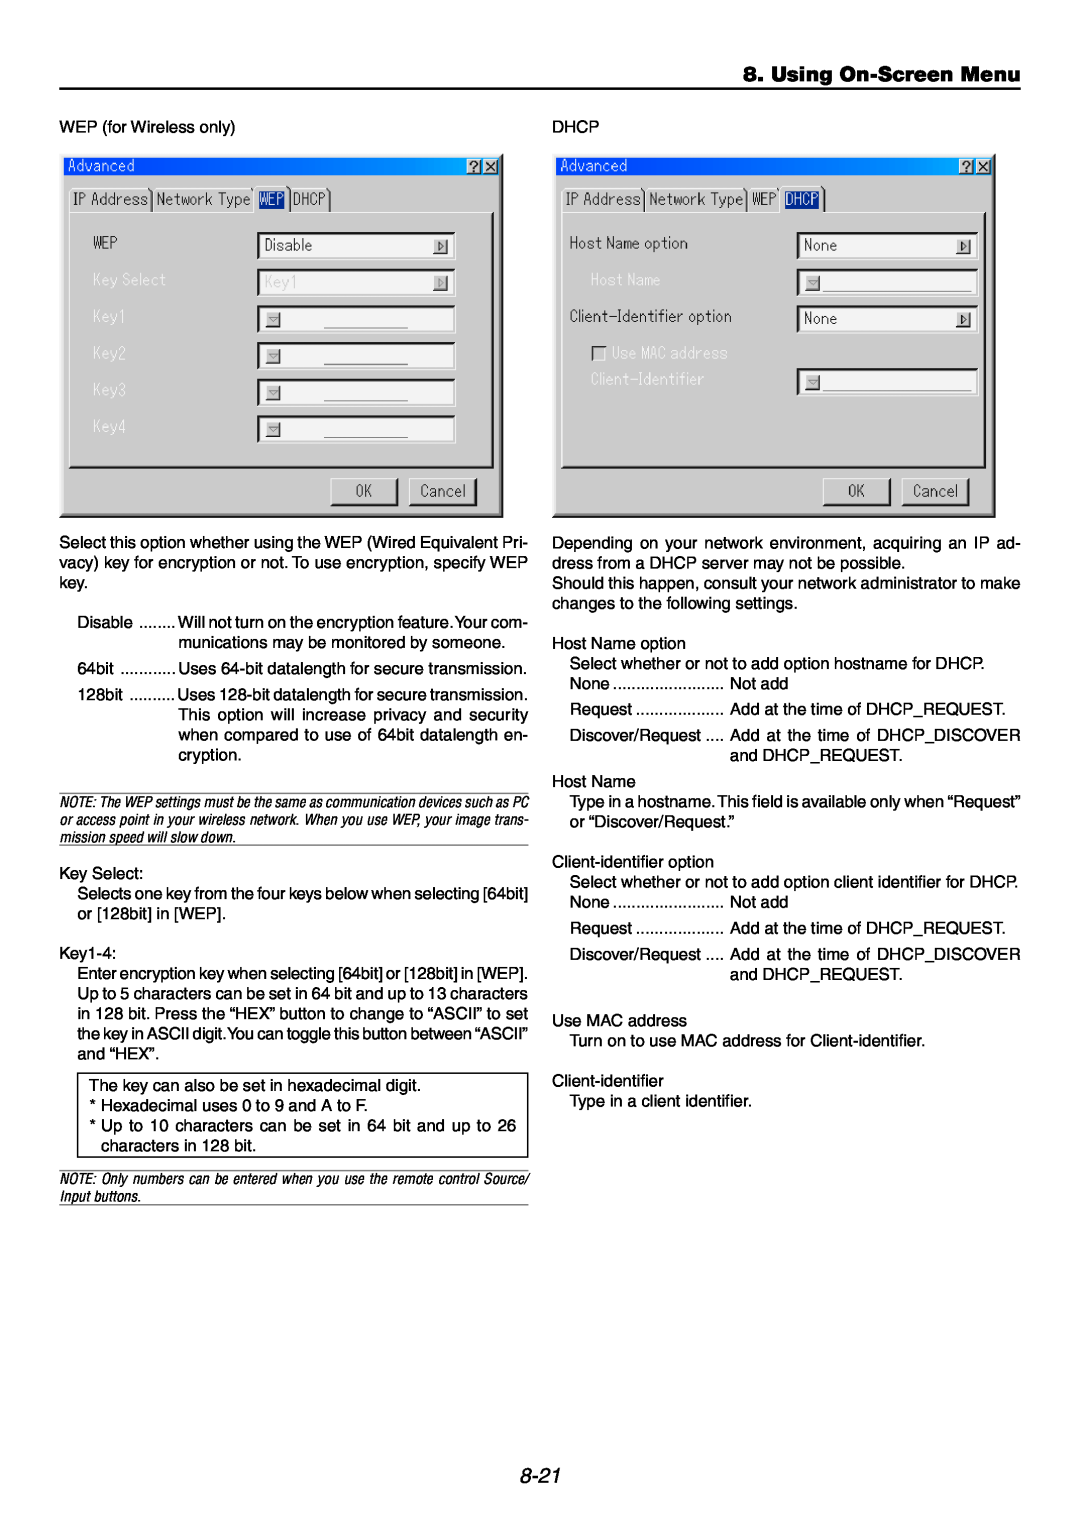 NEC GT6000 user manual Using On-ScreenMenu, 8-21, WEP for Wireless only 